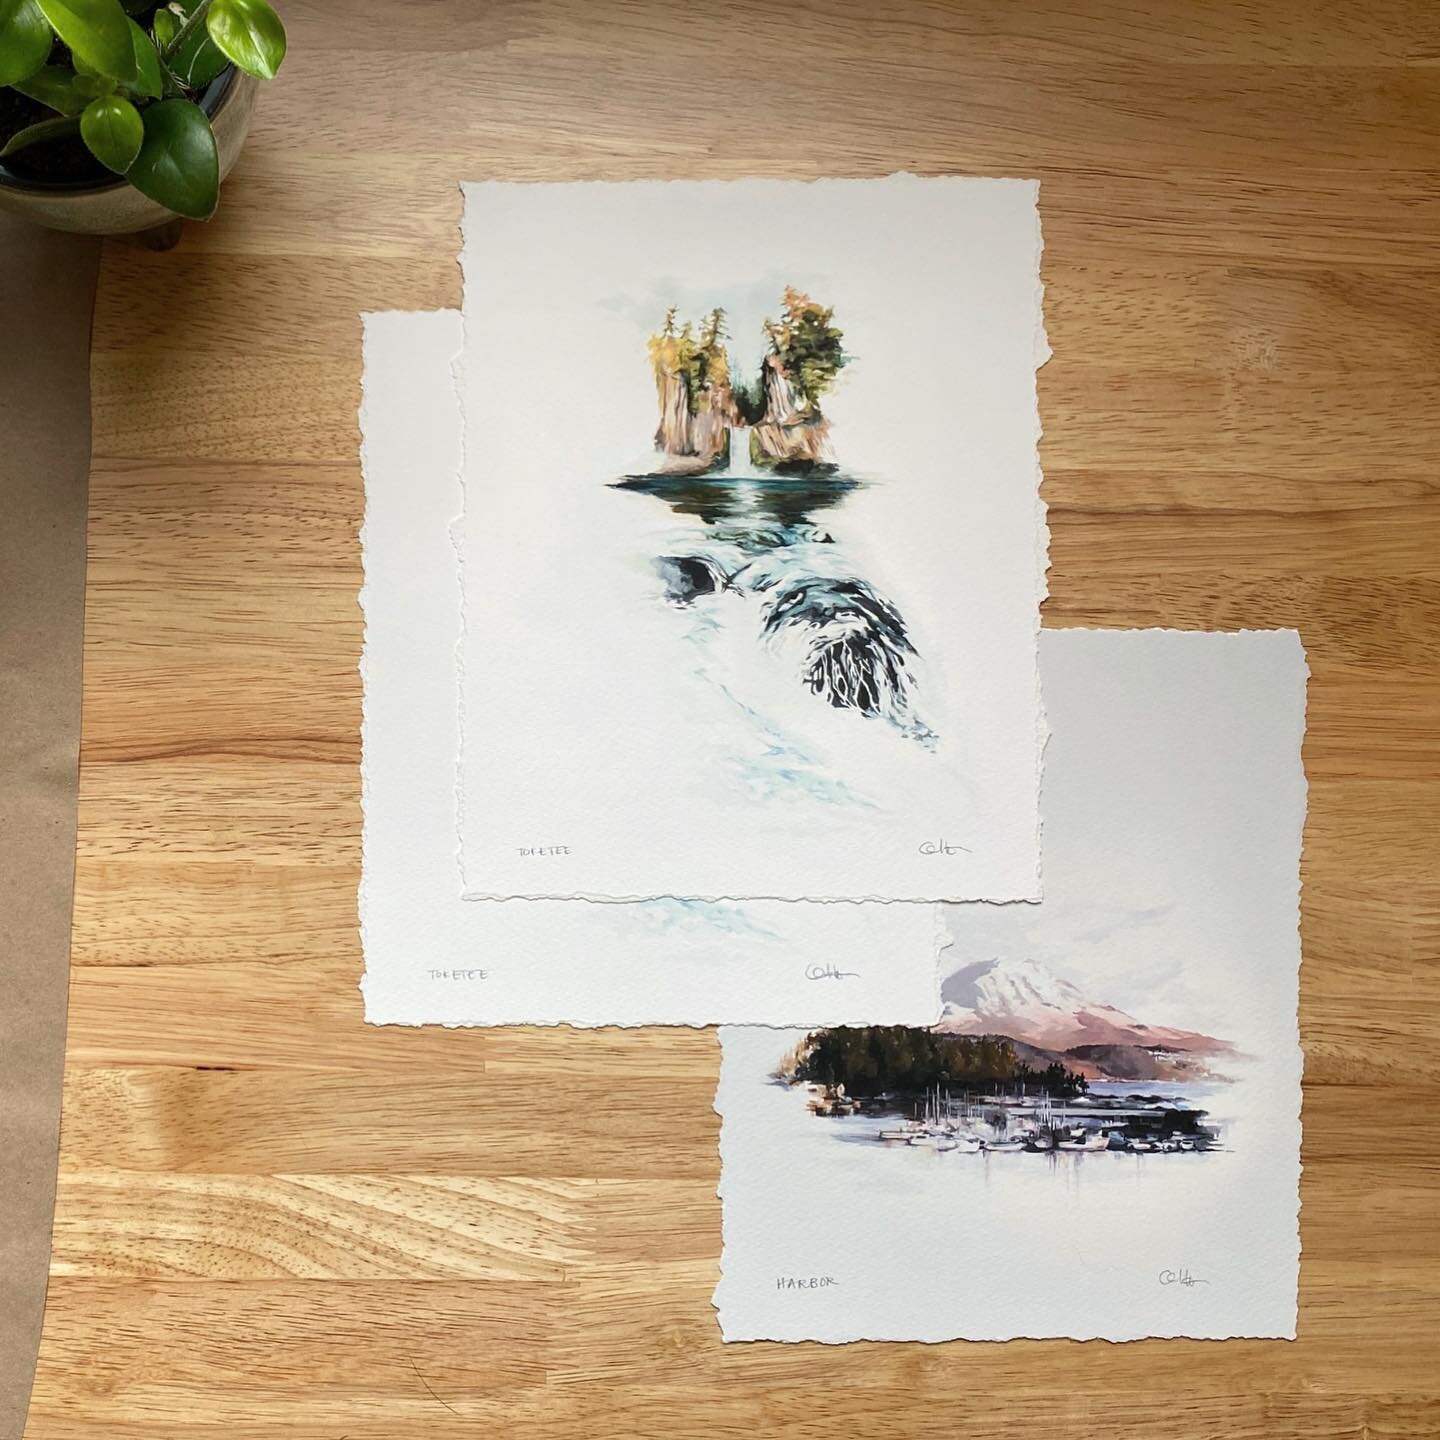 ✨15% off these new deckled edge prints just because✨

All are signed and titled, printed on a textured cream paper. Tokatee comes in a mini size too! Get the discount through the end of the week (March 25th). 

#bendoregonart #bendoregonartist #orego